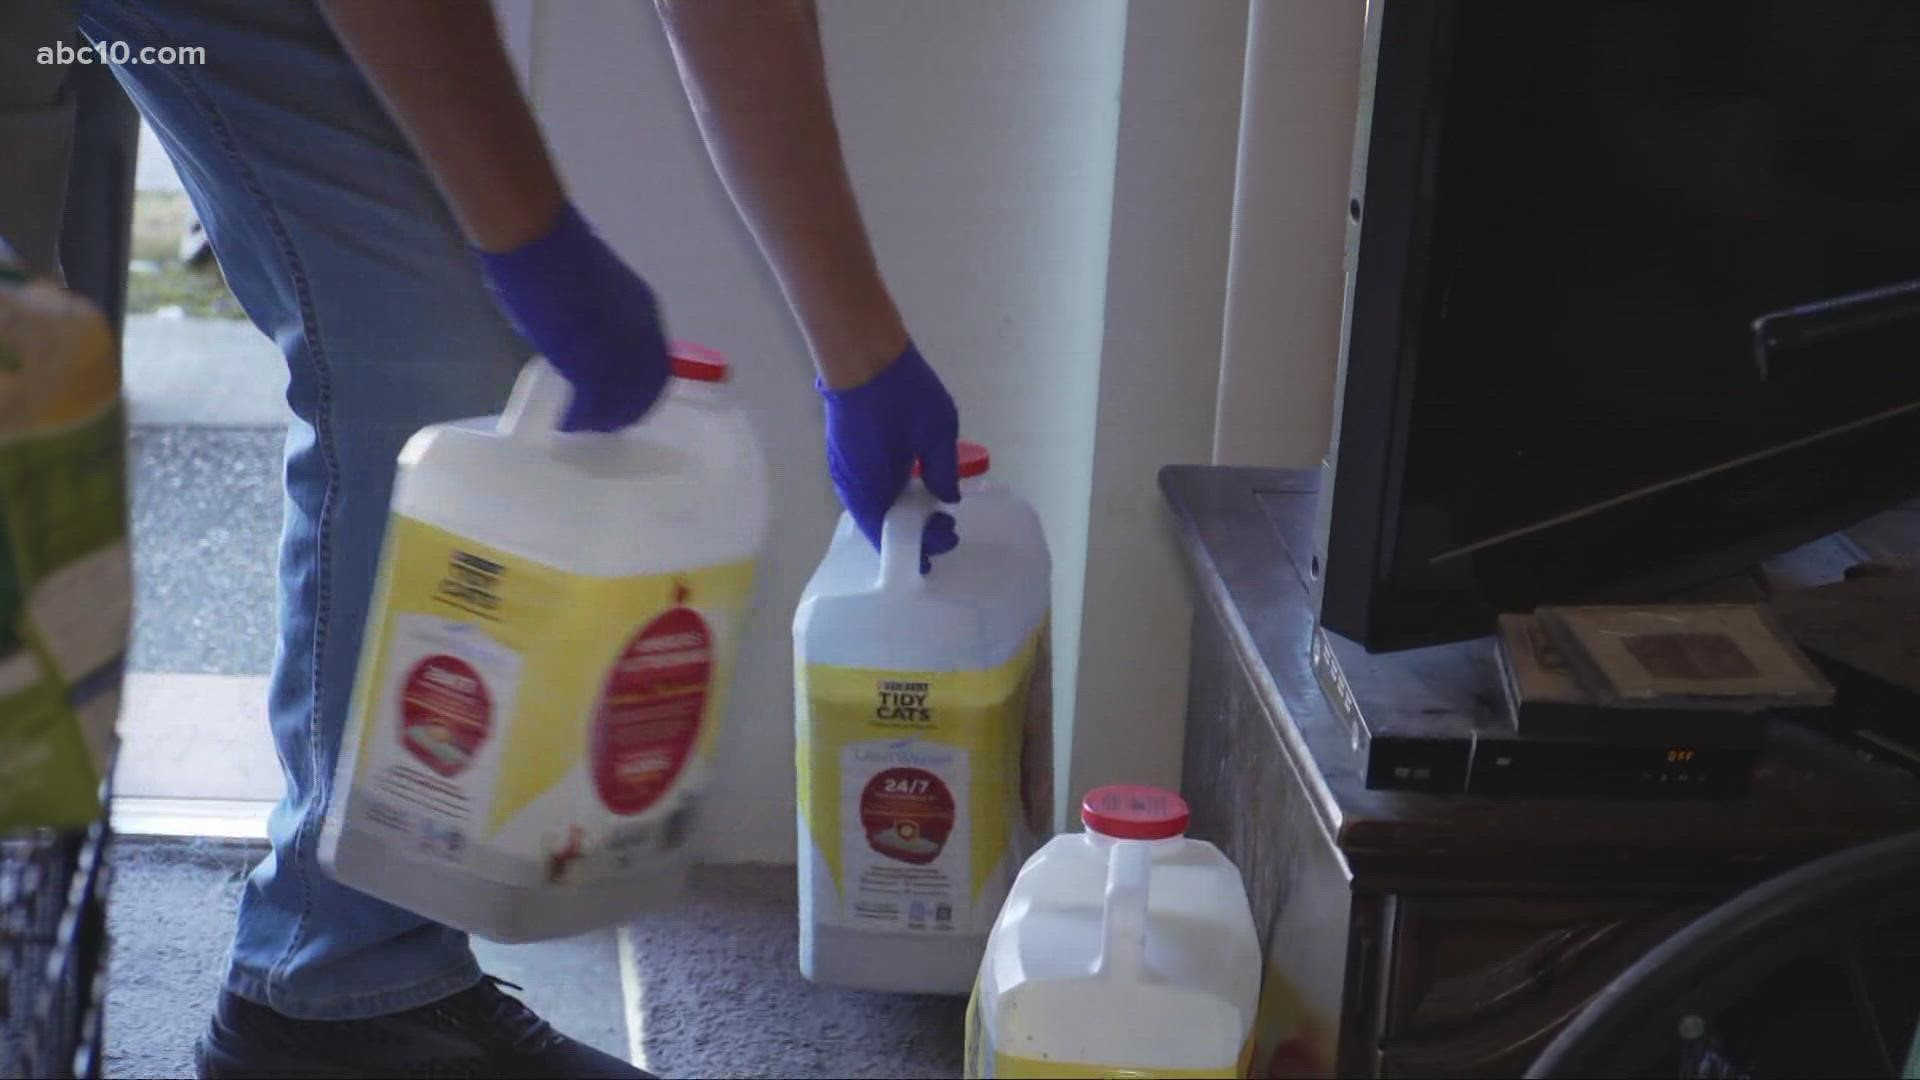 After they claim Sacramento County in-home services neglected to clean their home, the home-bound senior couple received help from a viewer who heard their story.